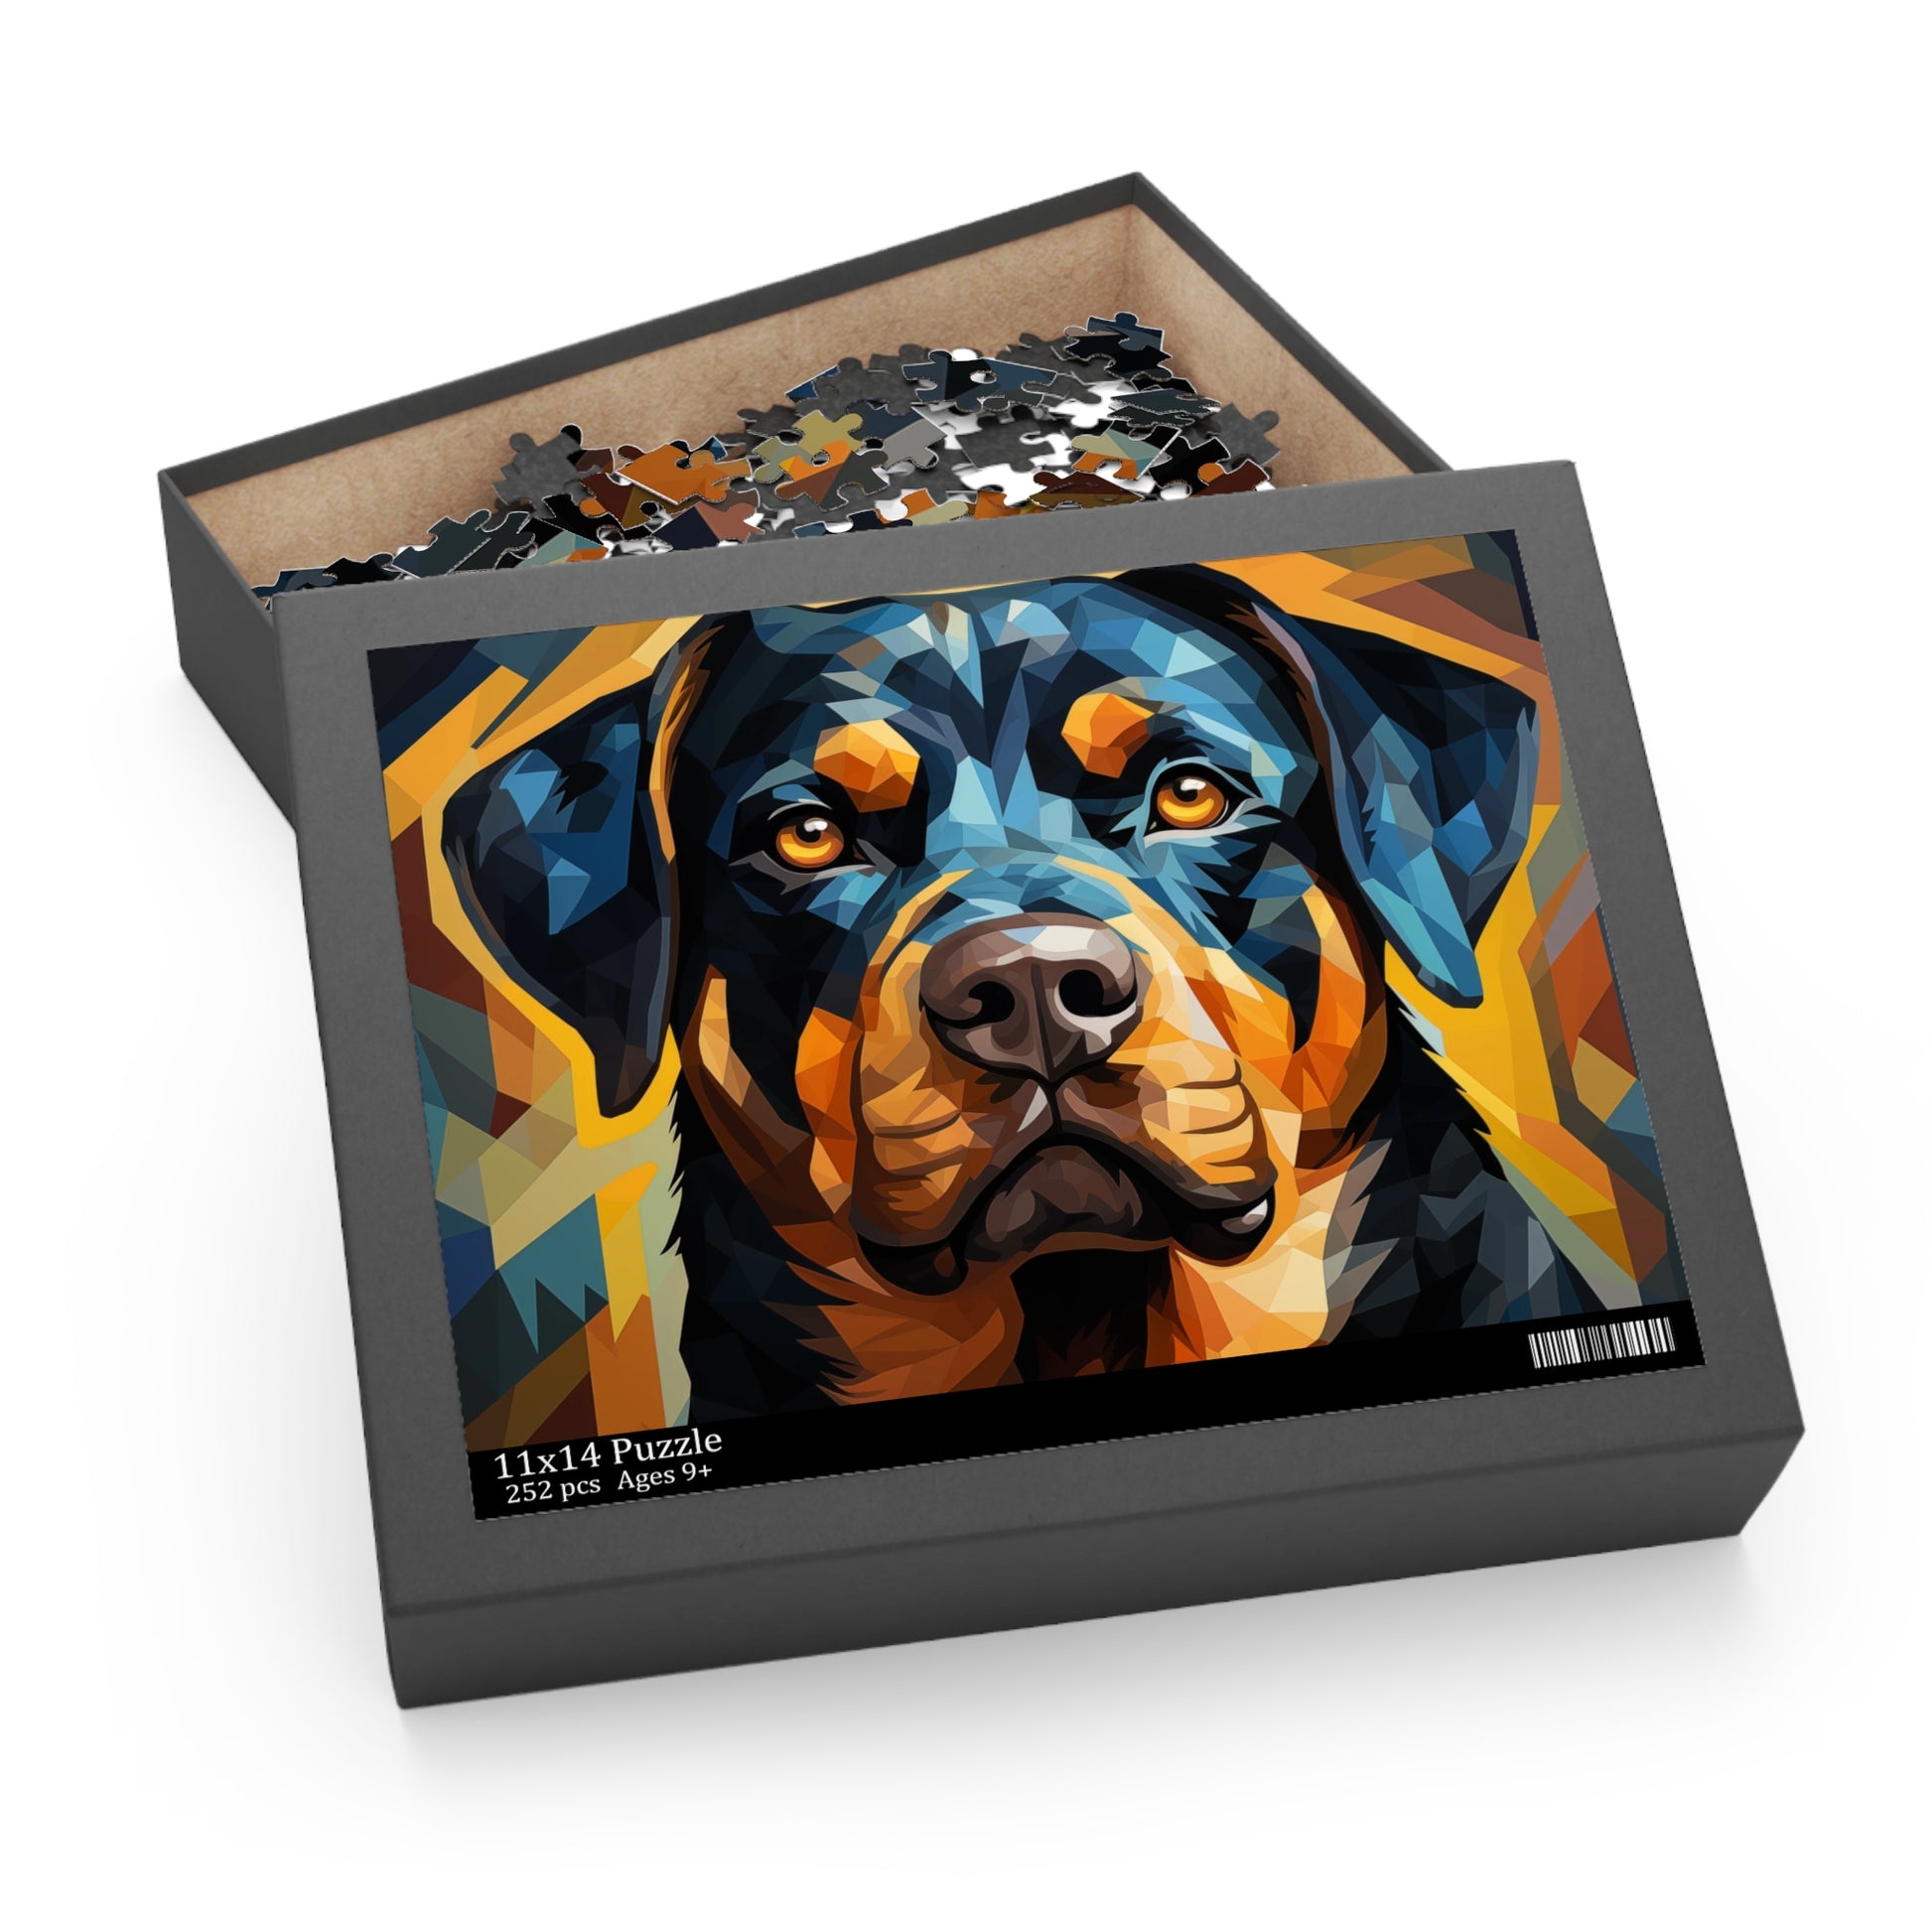 Abstract Rottweiler Dog Jigsaw Puzzle for Boys, Girls, Kids Adult Birthday Business Jigsaw Puzzle Gift for Him Funny Humorous Indoor Outdoor Game Gift For Her Online-8